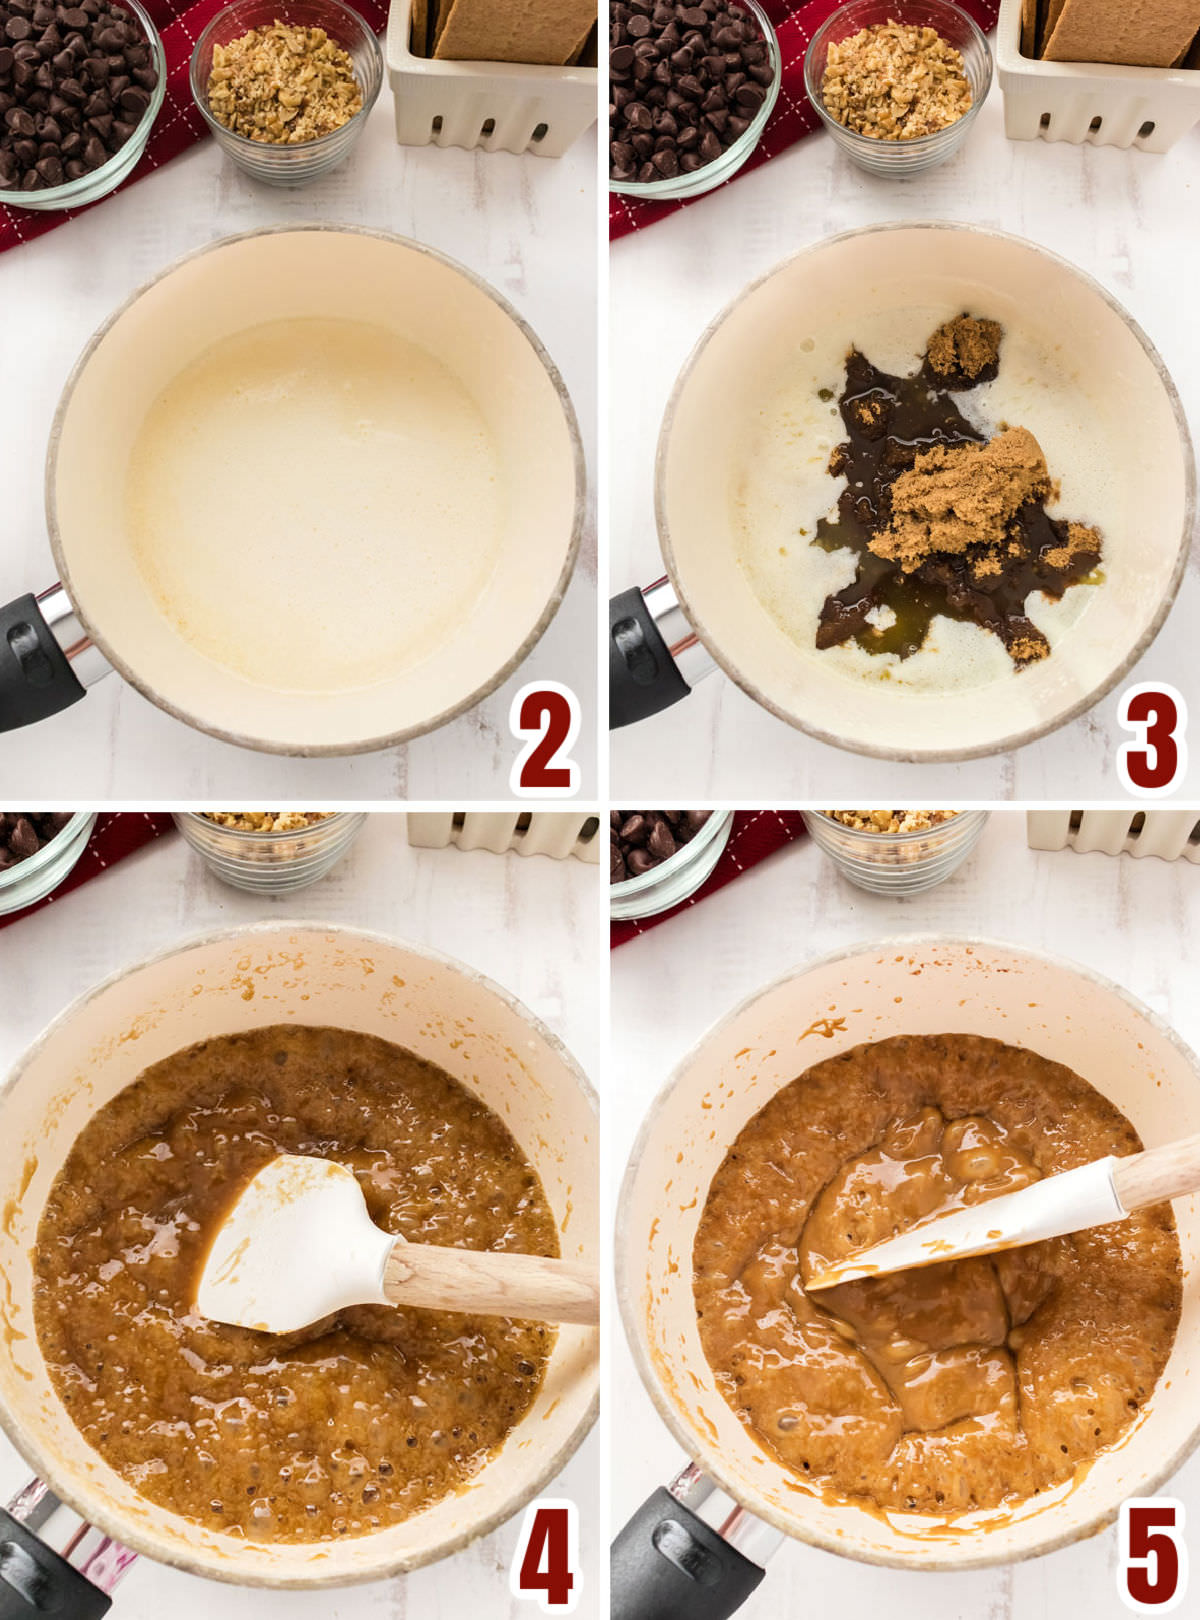 Collage image showing how to make the Toffee mixture.